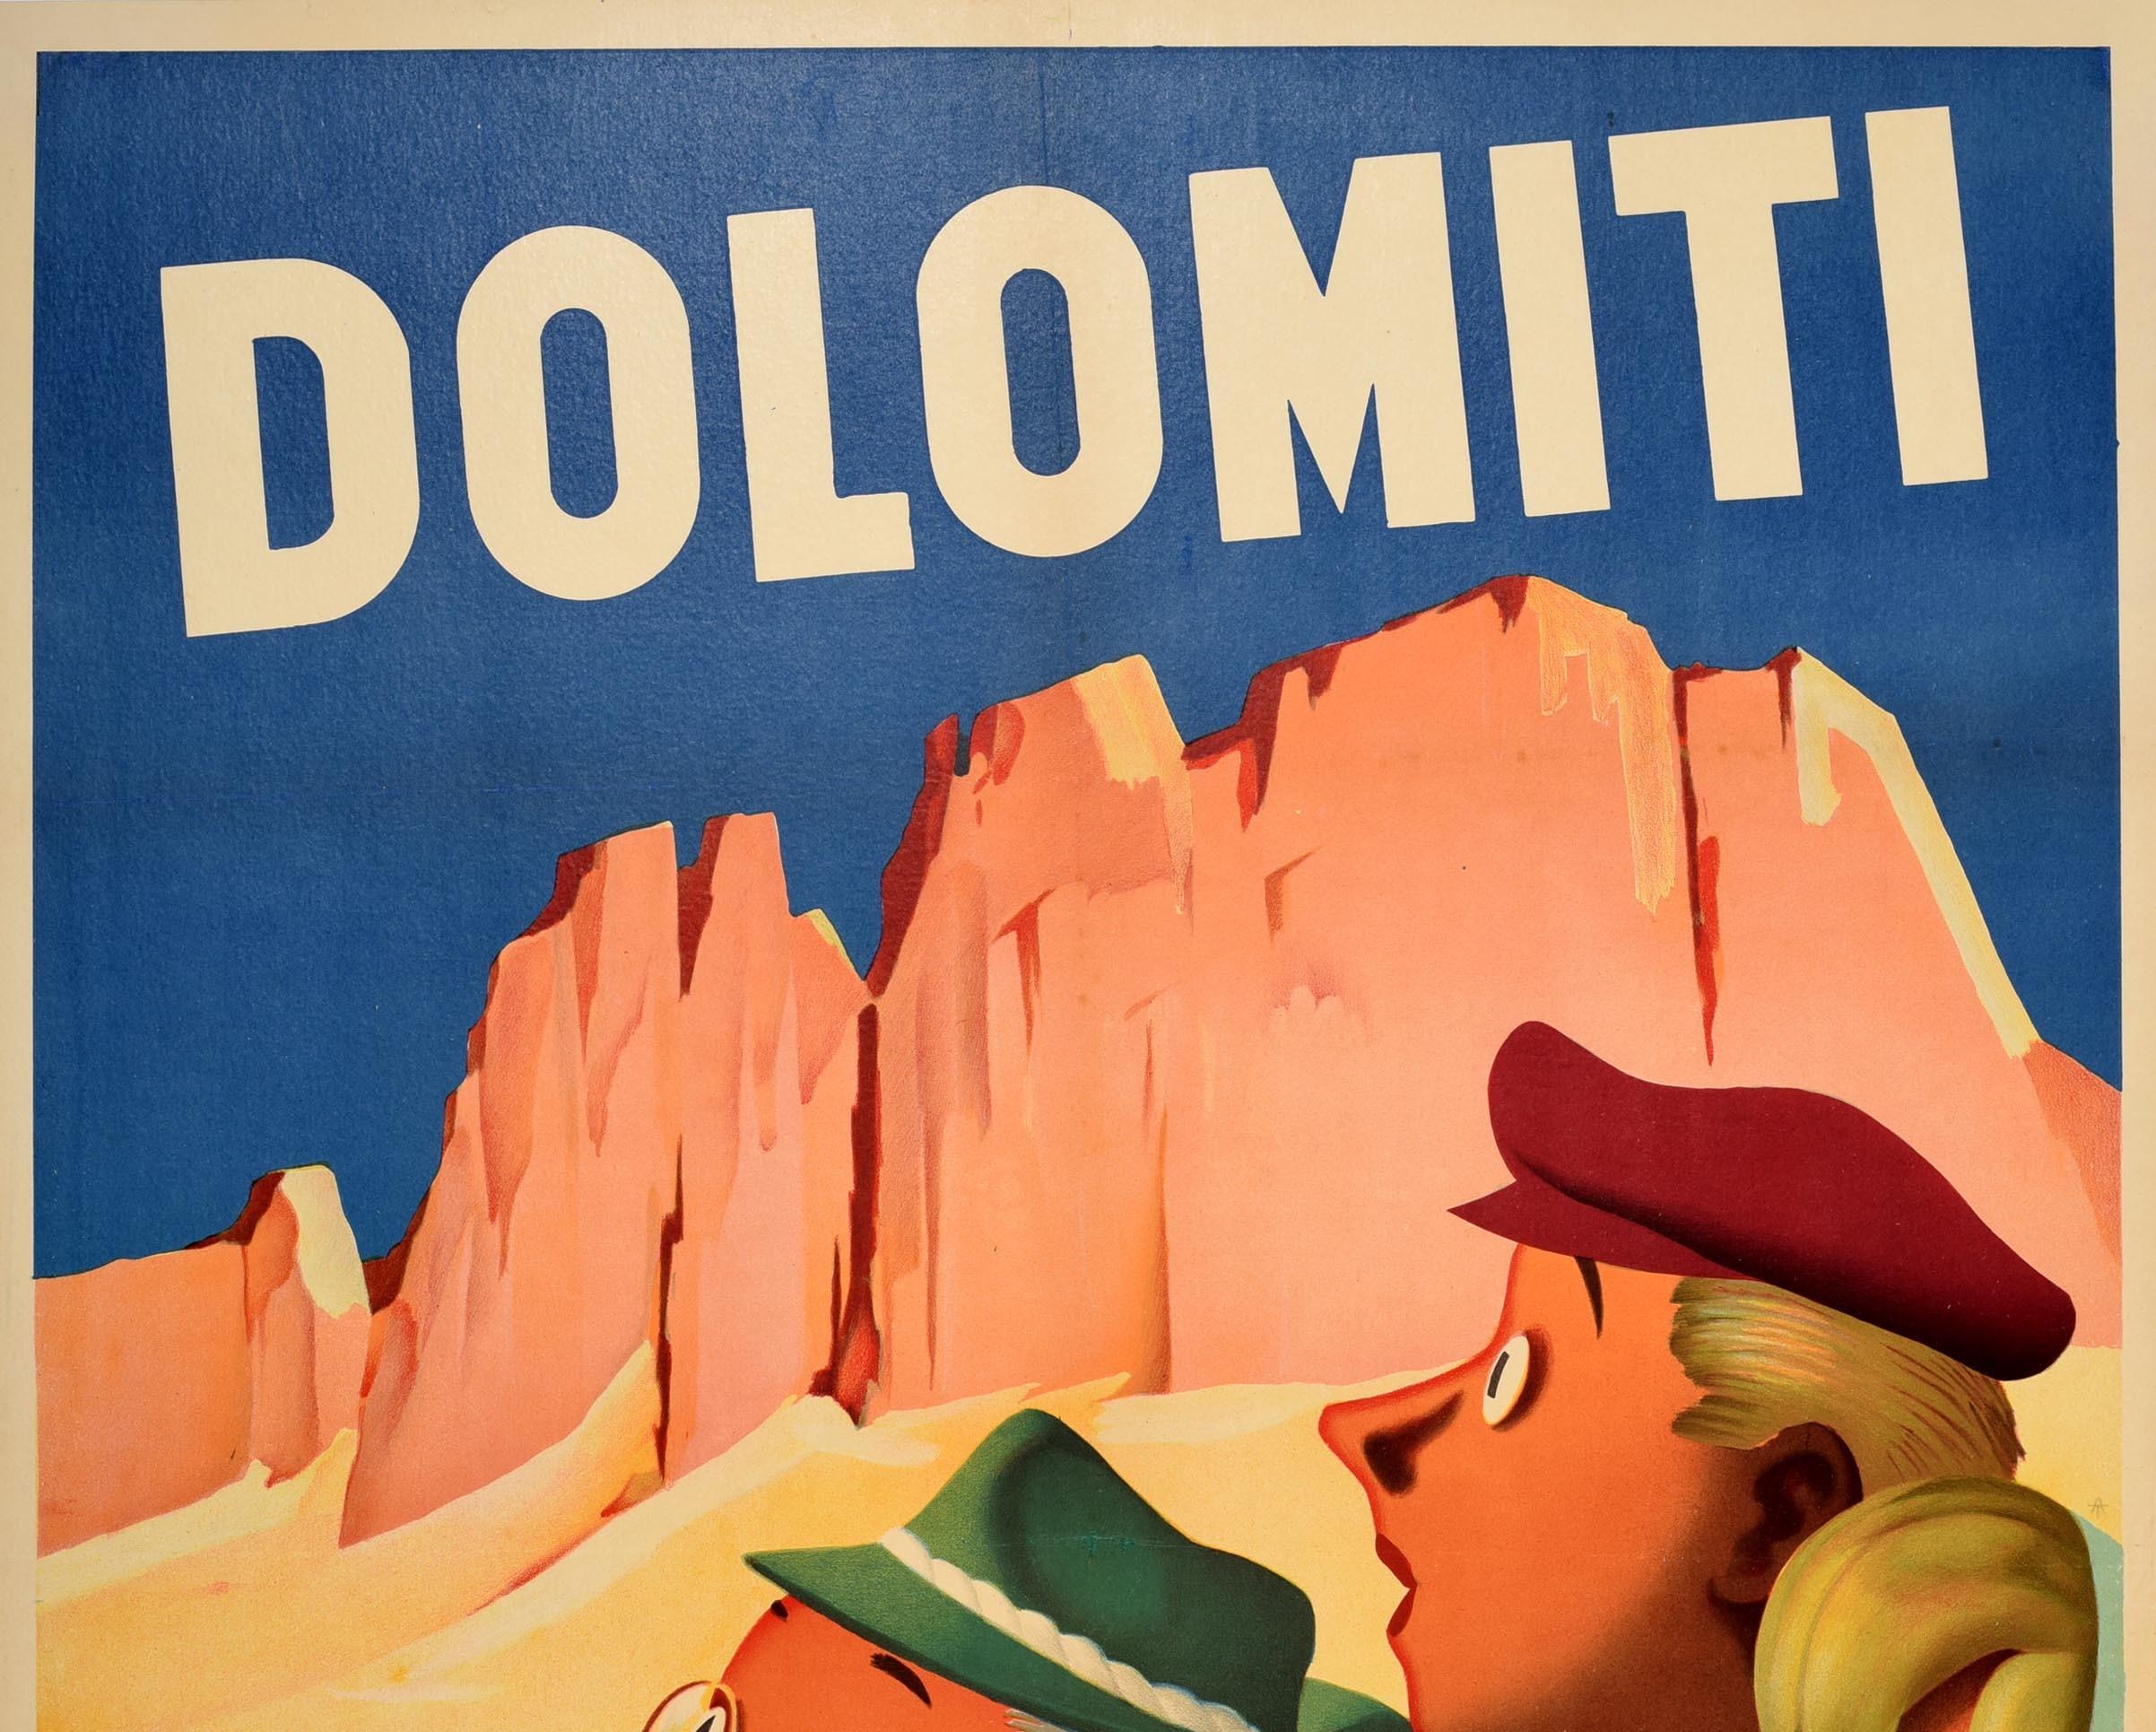 Original Vintage Travel Poster Dolomiti Visit The Dolomites Italy Alps Mountains - Print by Unknown